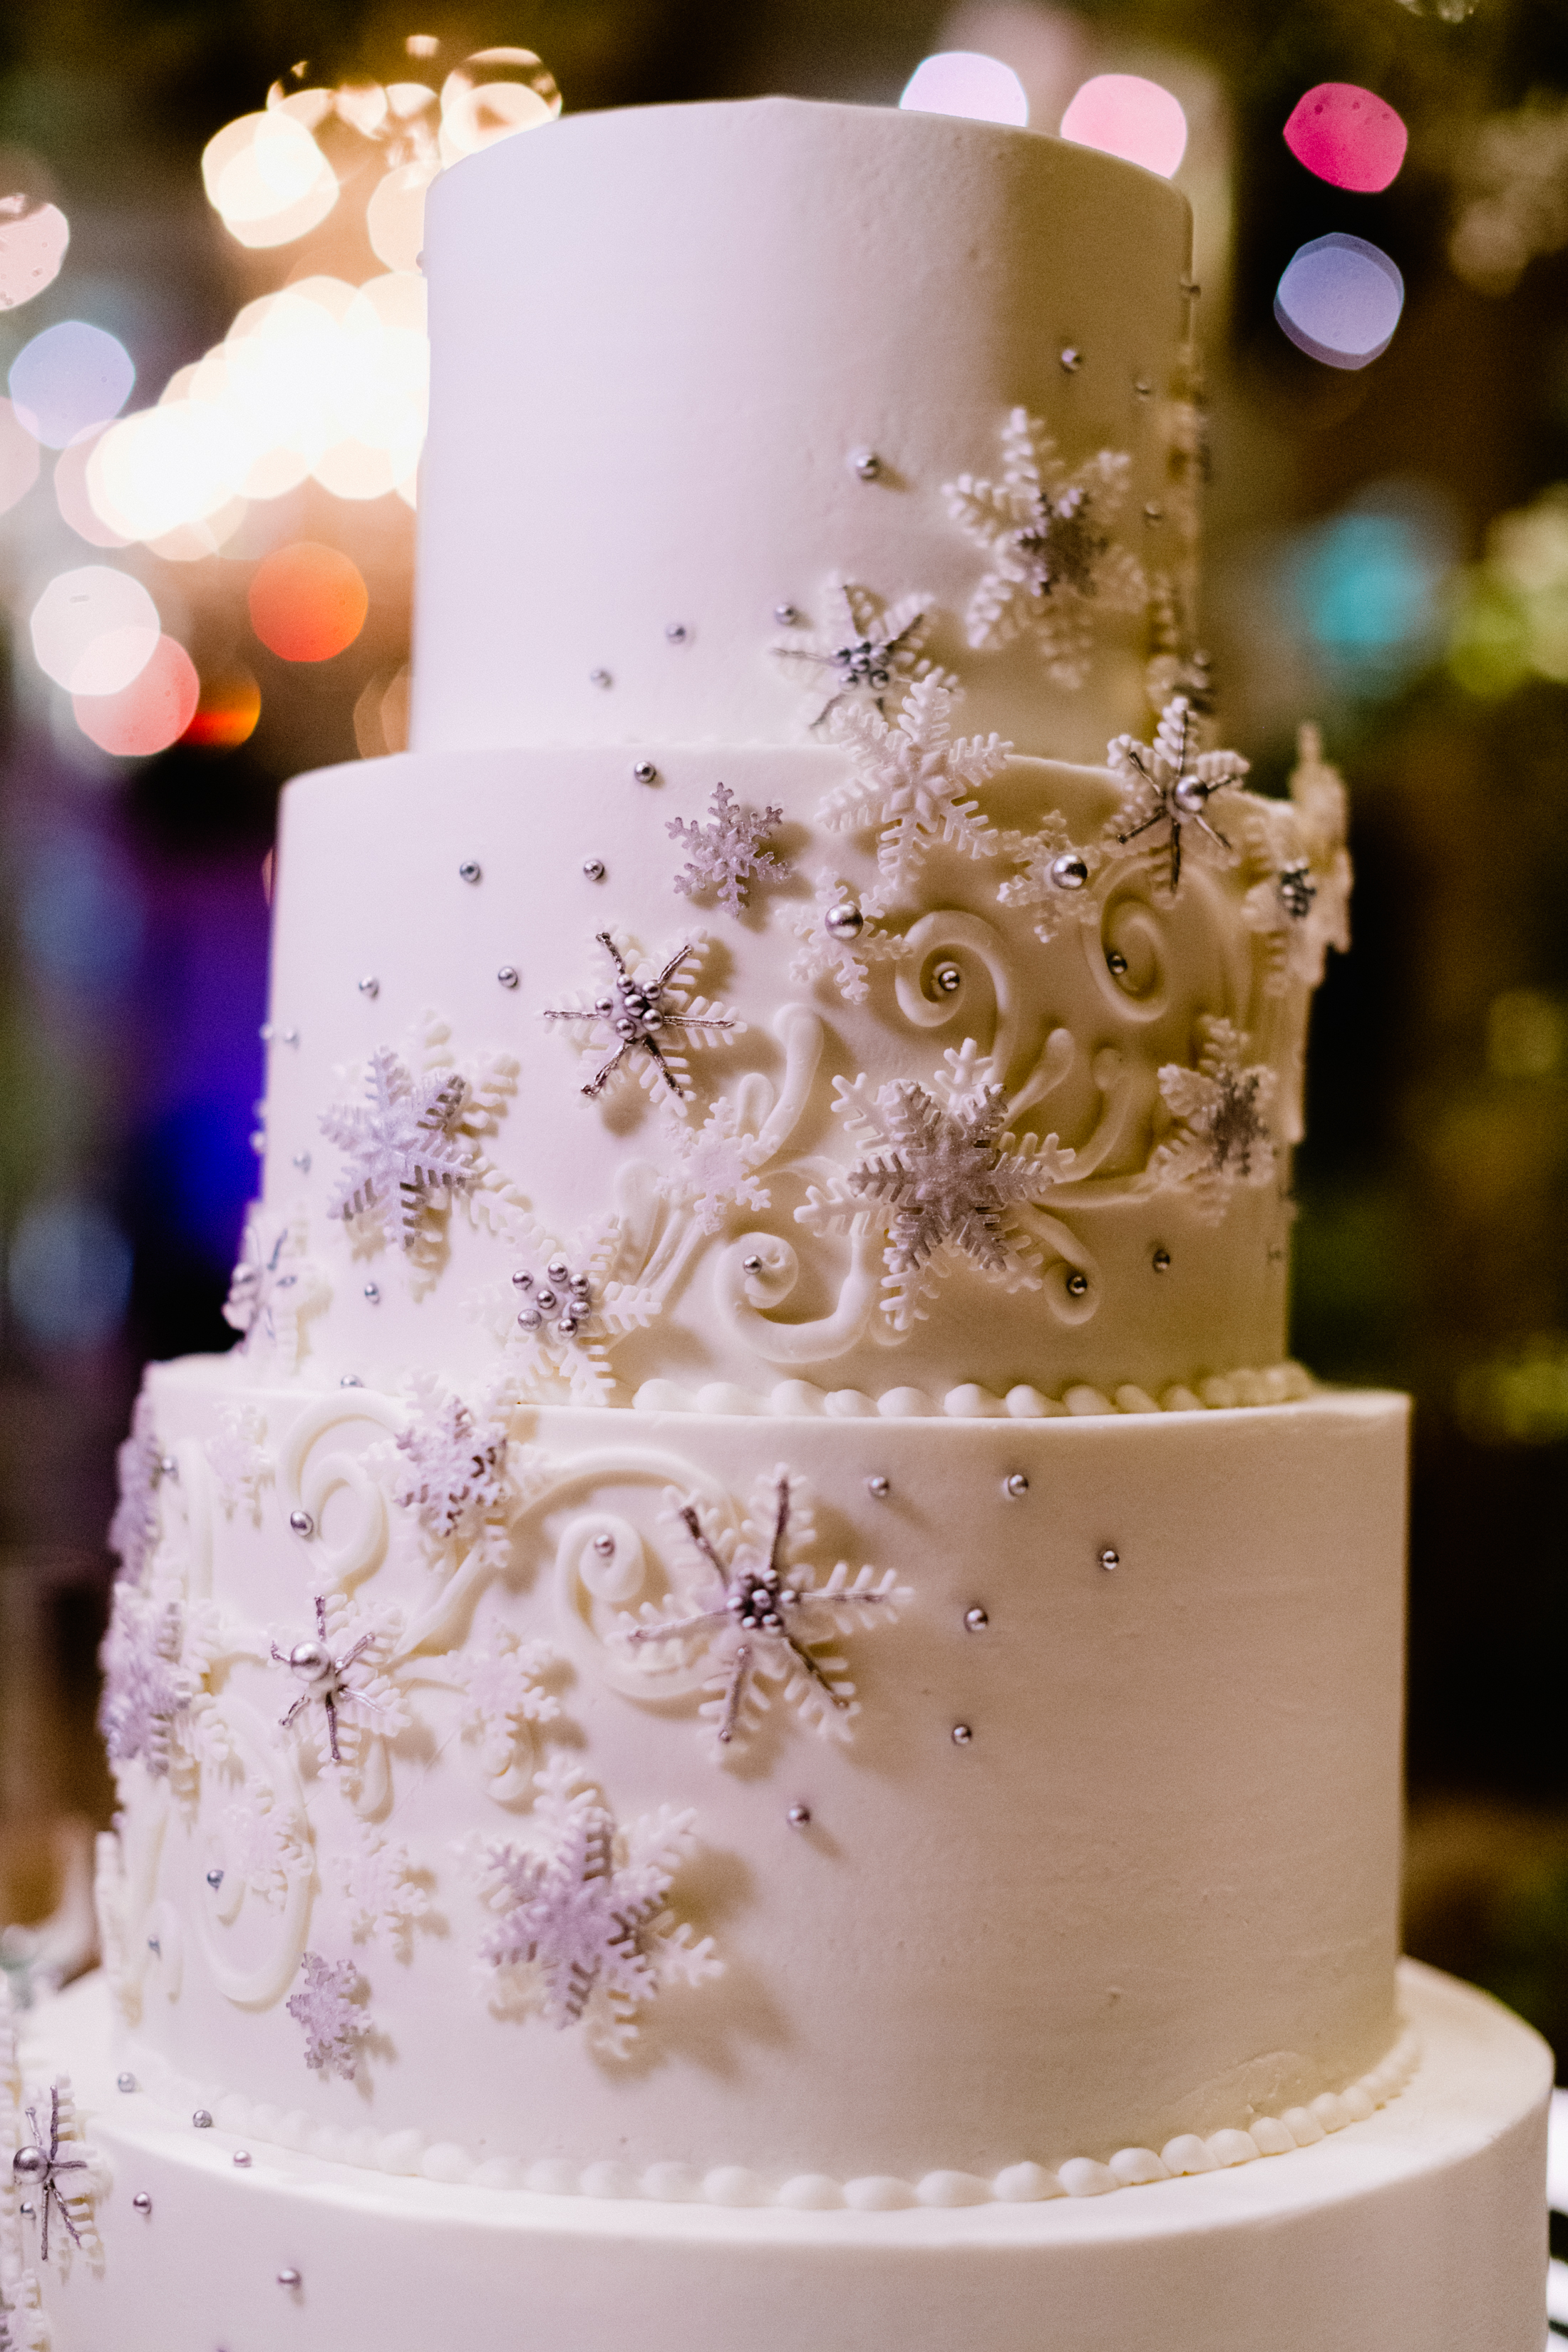 A white wedding cake with snowflake details for an opulent winter wedding.